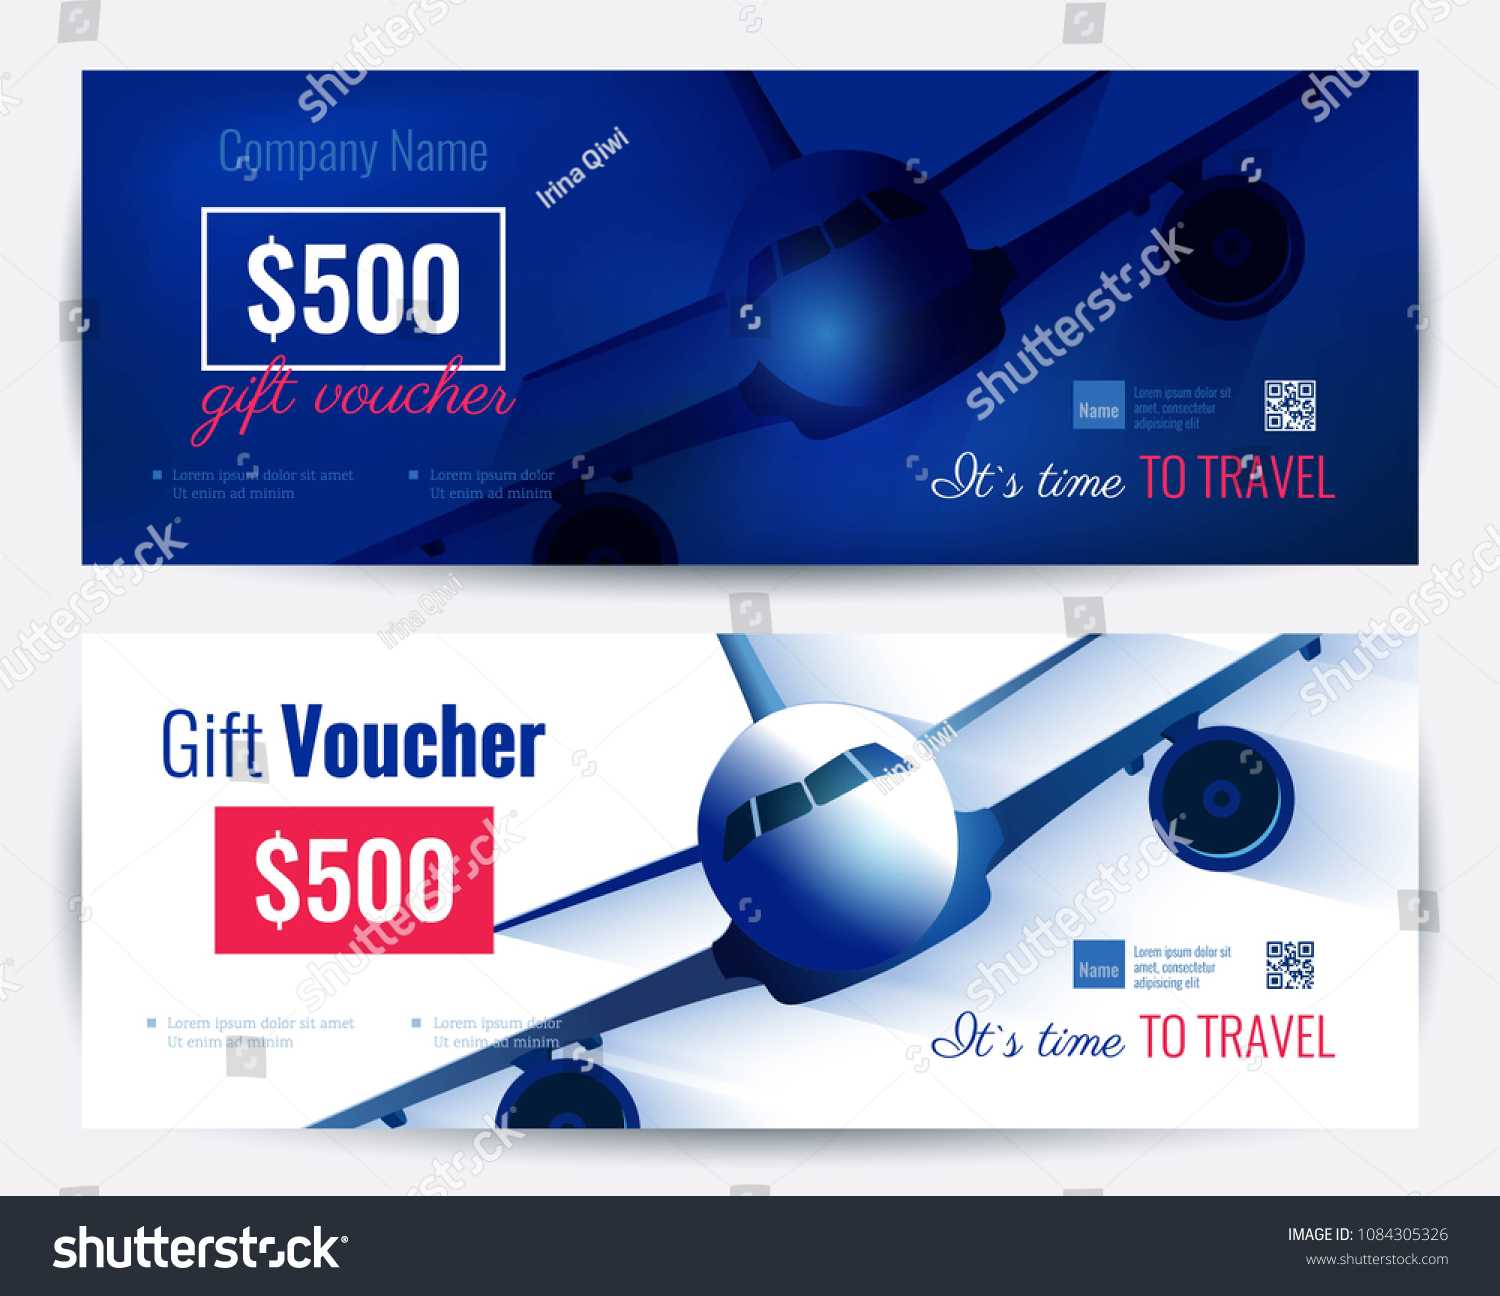 Travel Voucher Template Images, Stock Photos & Vectors Intended For Free Travel Gift Certificate Template